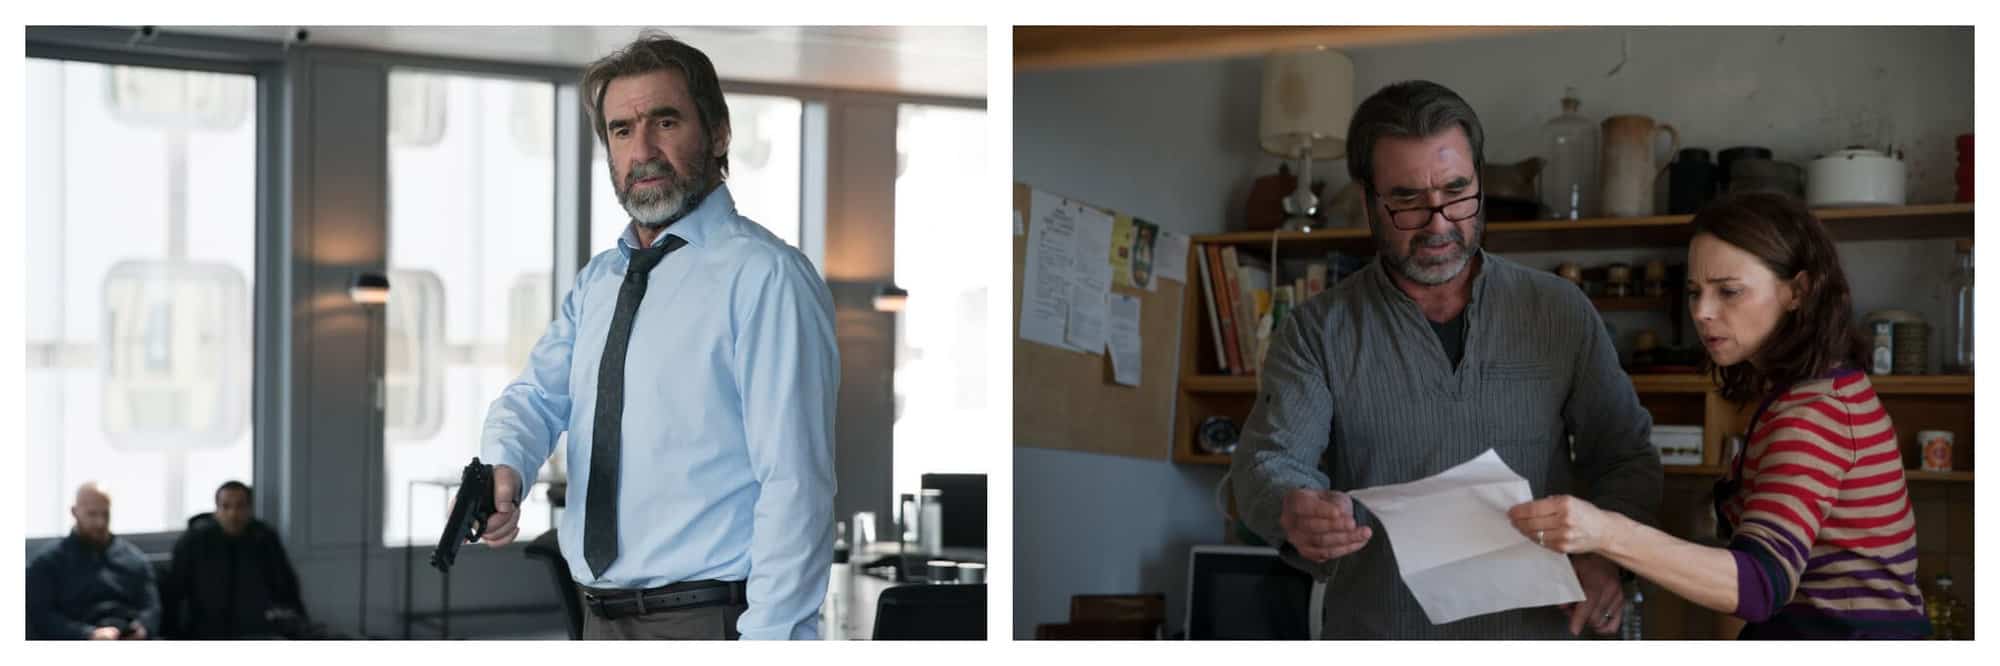 Left: man with a beard wearing a blue button up shirt with a tie holding a gun in an office space. Two men sitting down can be seen in the background to the left. Right: a man with a beard and a gray shirt and a woman with dark hair and a striped shirt looking at a piece of paper in a cluttered office. Both images are from "Inhuman Resources" Netflix series.  